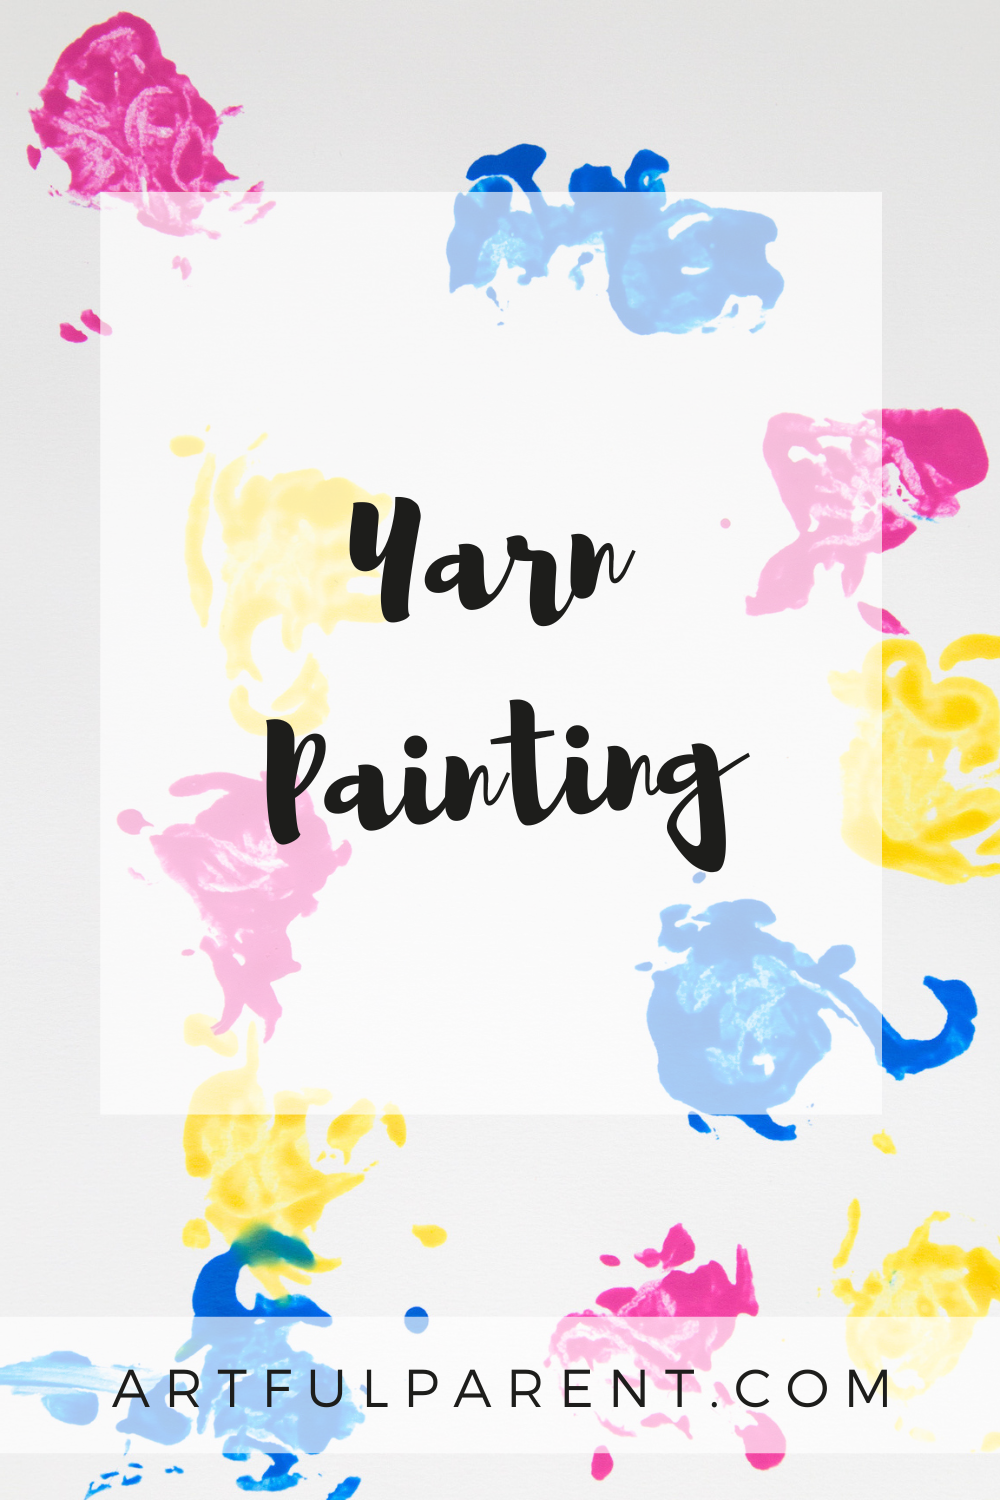 How to Do Yarn Painting